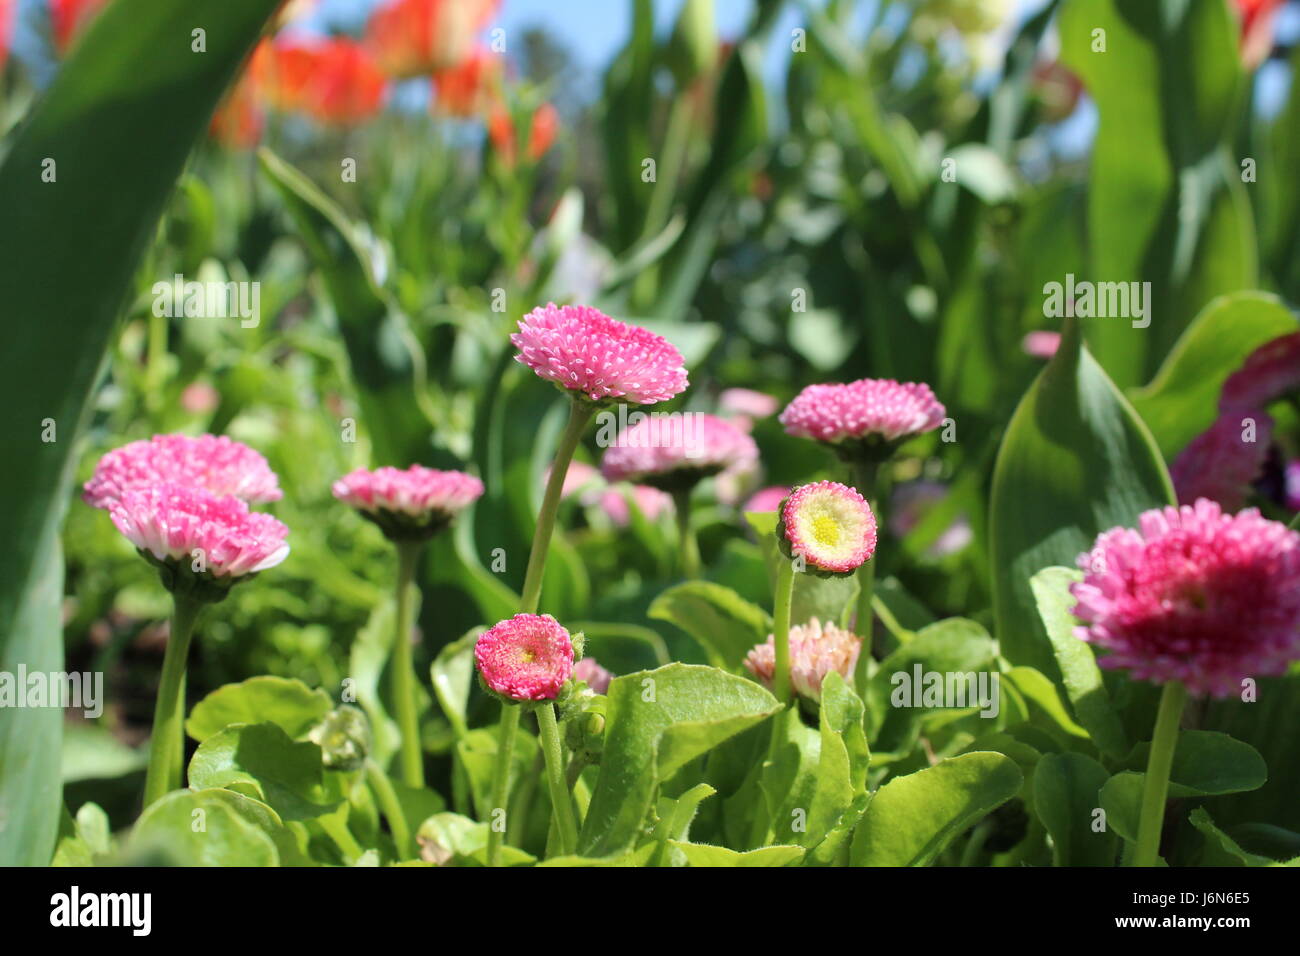 Small pink flowers in a garden bed, amidst green plants. Stock Photo